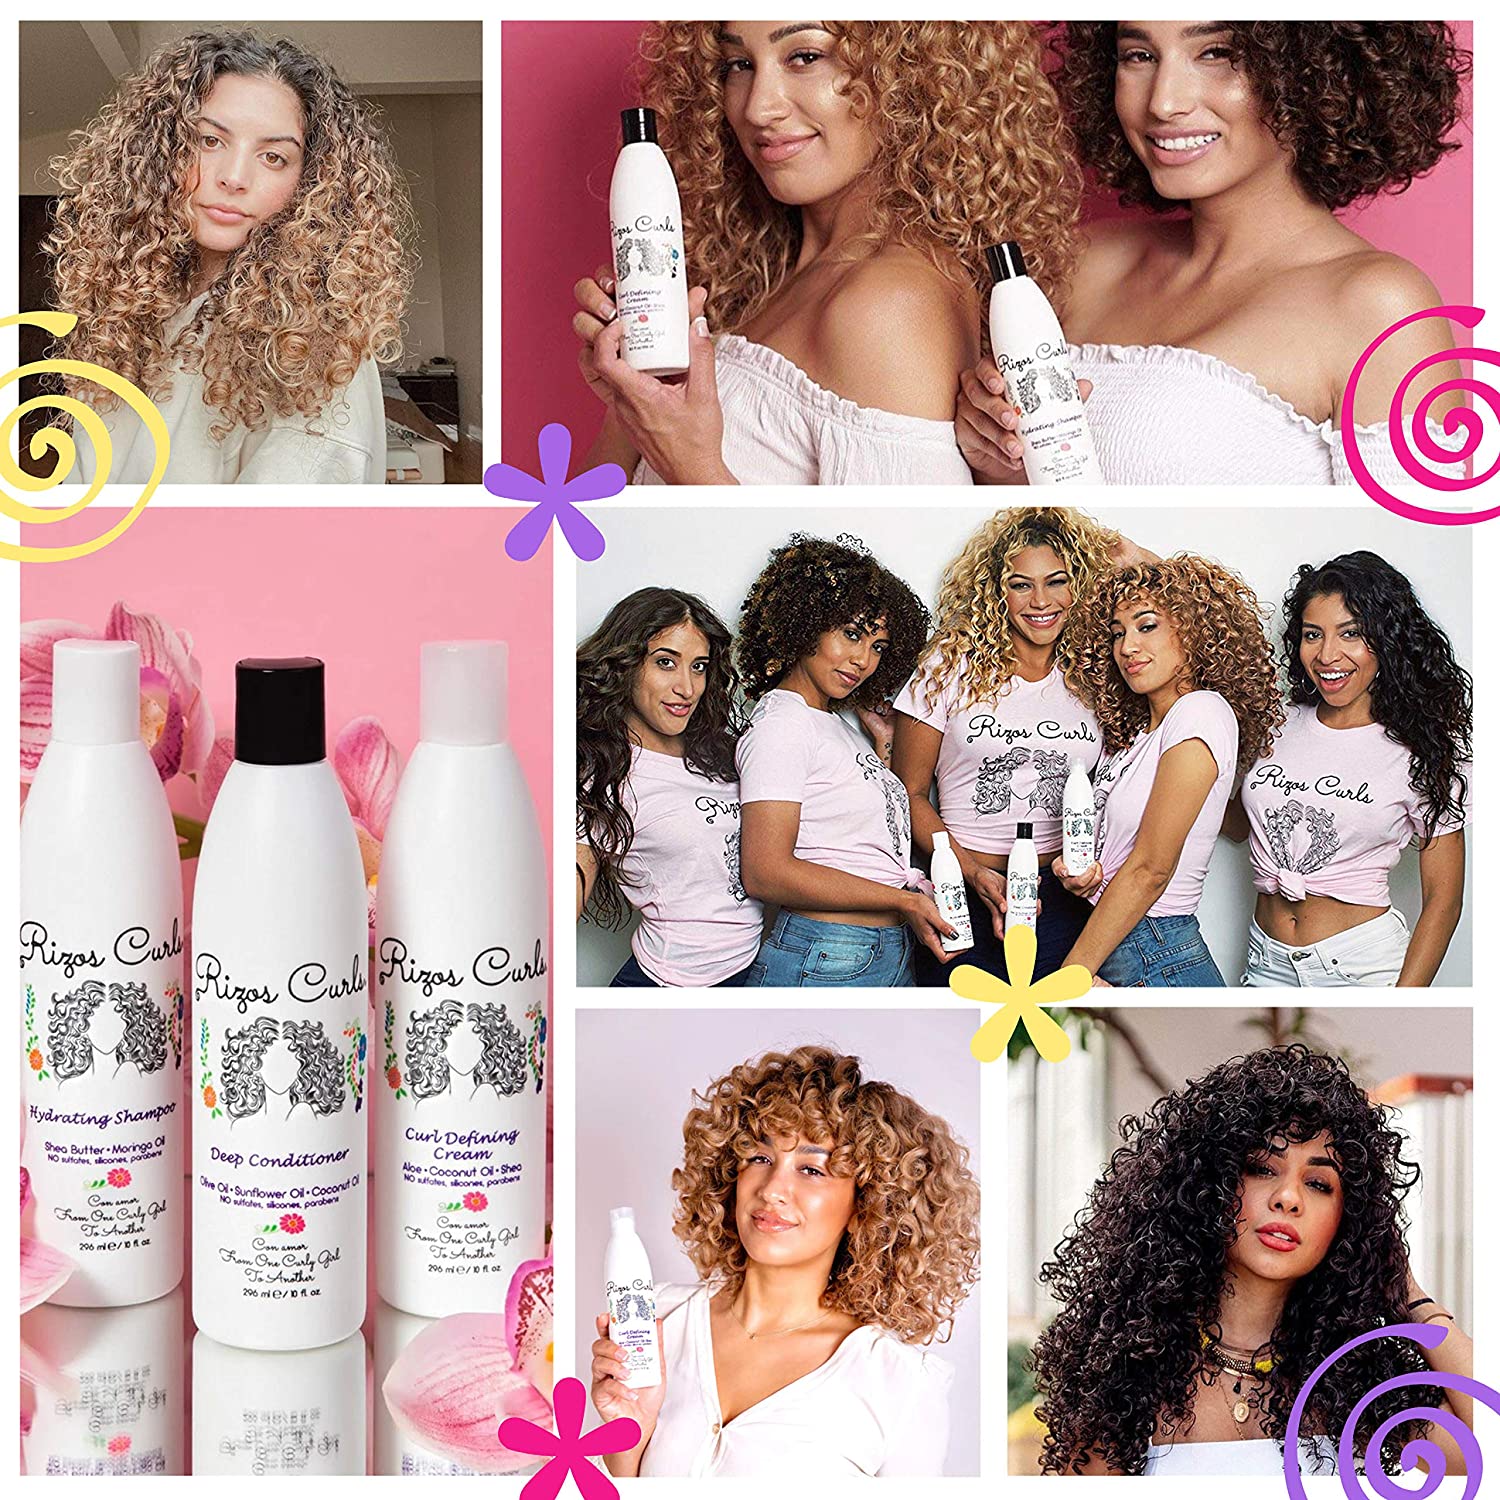 Rizos Curls Hydrating Shampoo, Deep Conditioner & Curl Defining Cream for Curly Hair Products - Intense Treatment & Nourishment for Wavy and Curly Hair (Hair Care Set) - image 5 of 7